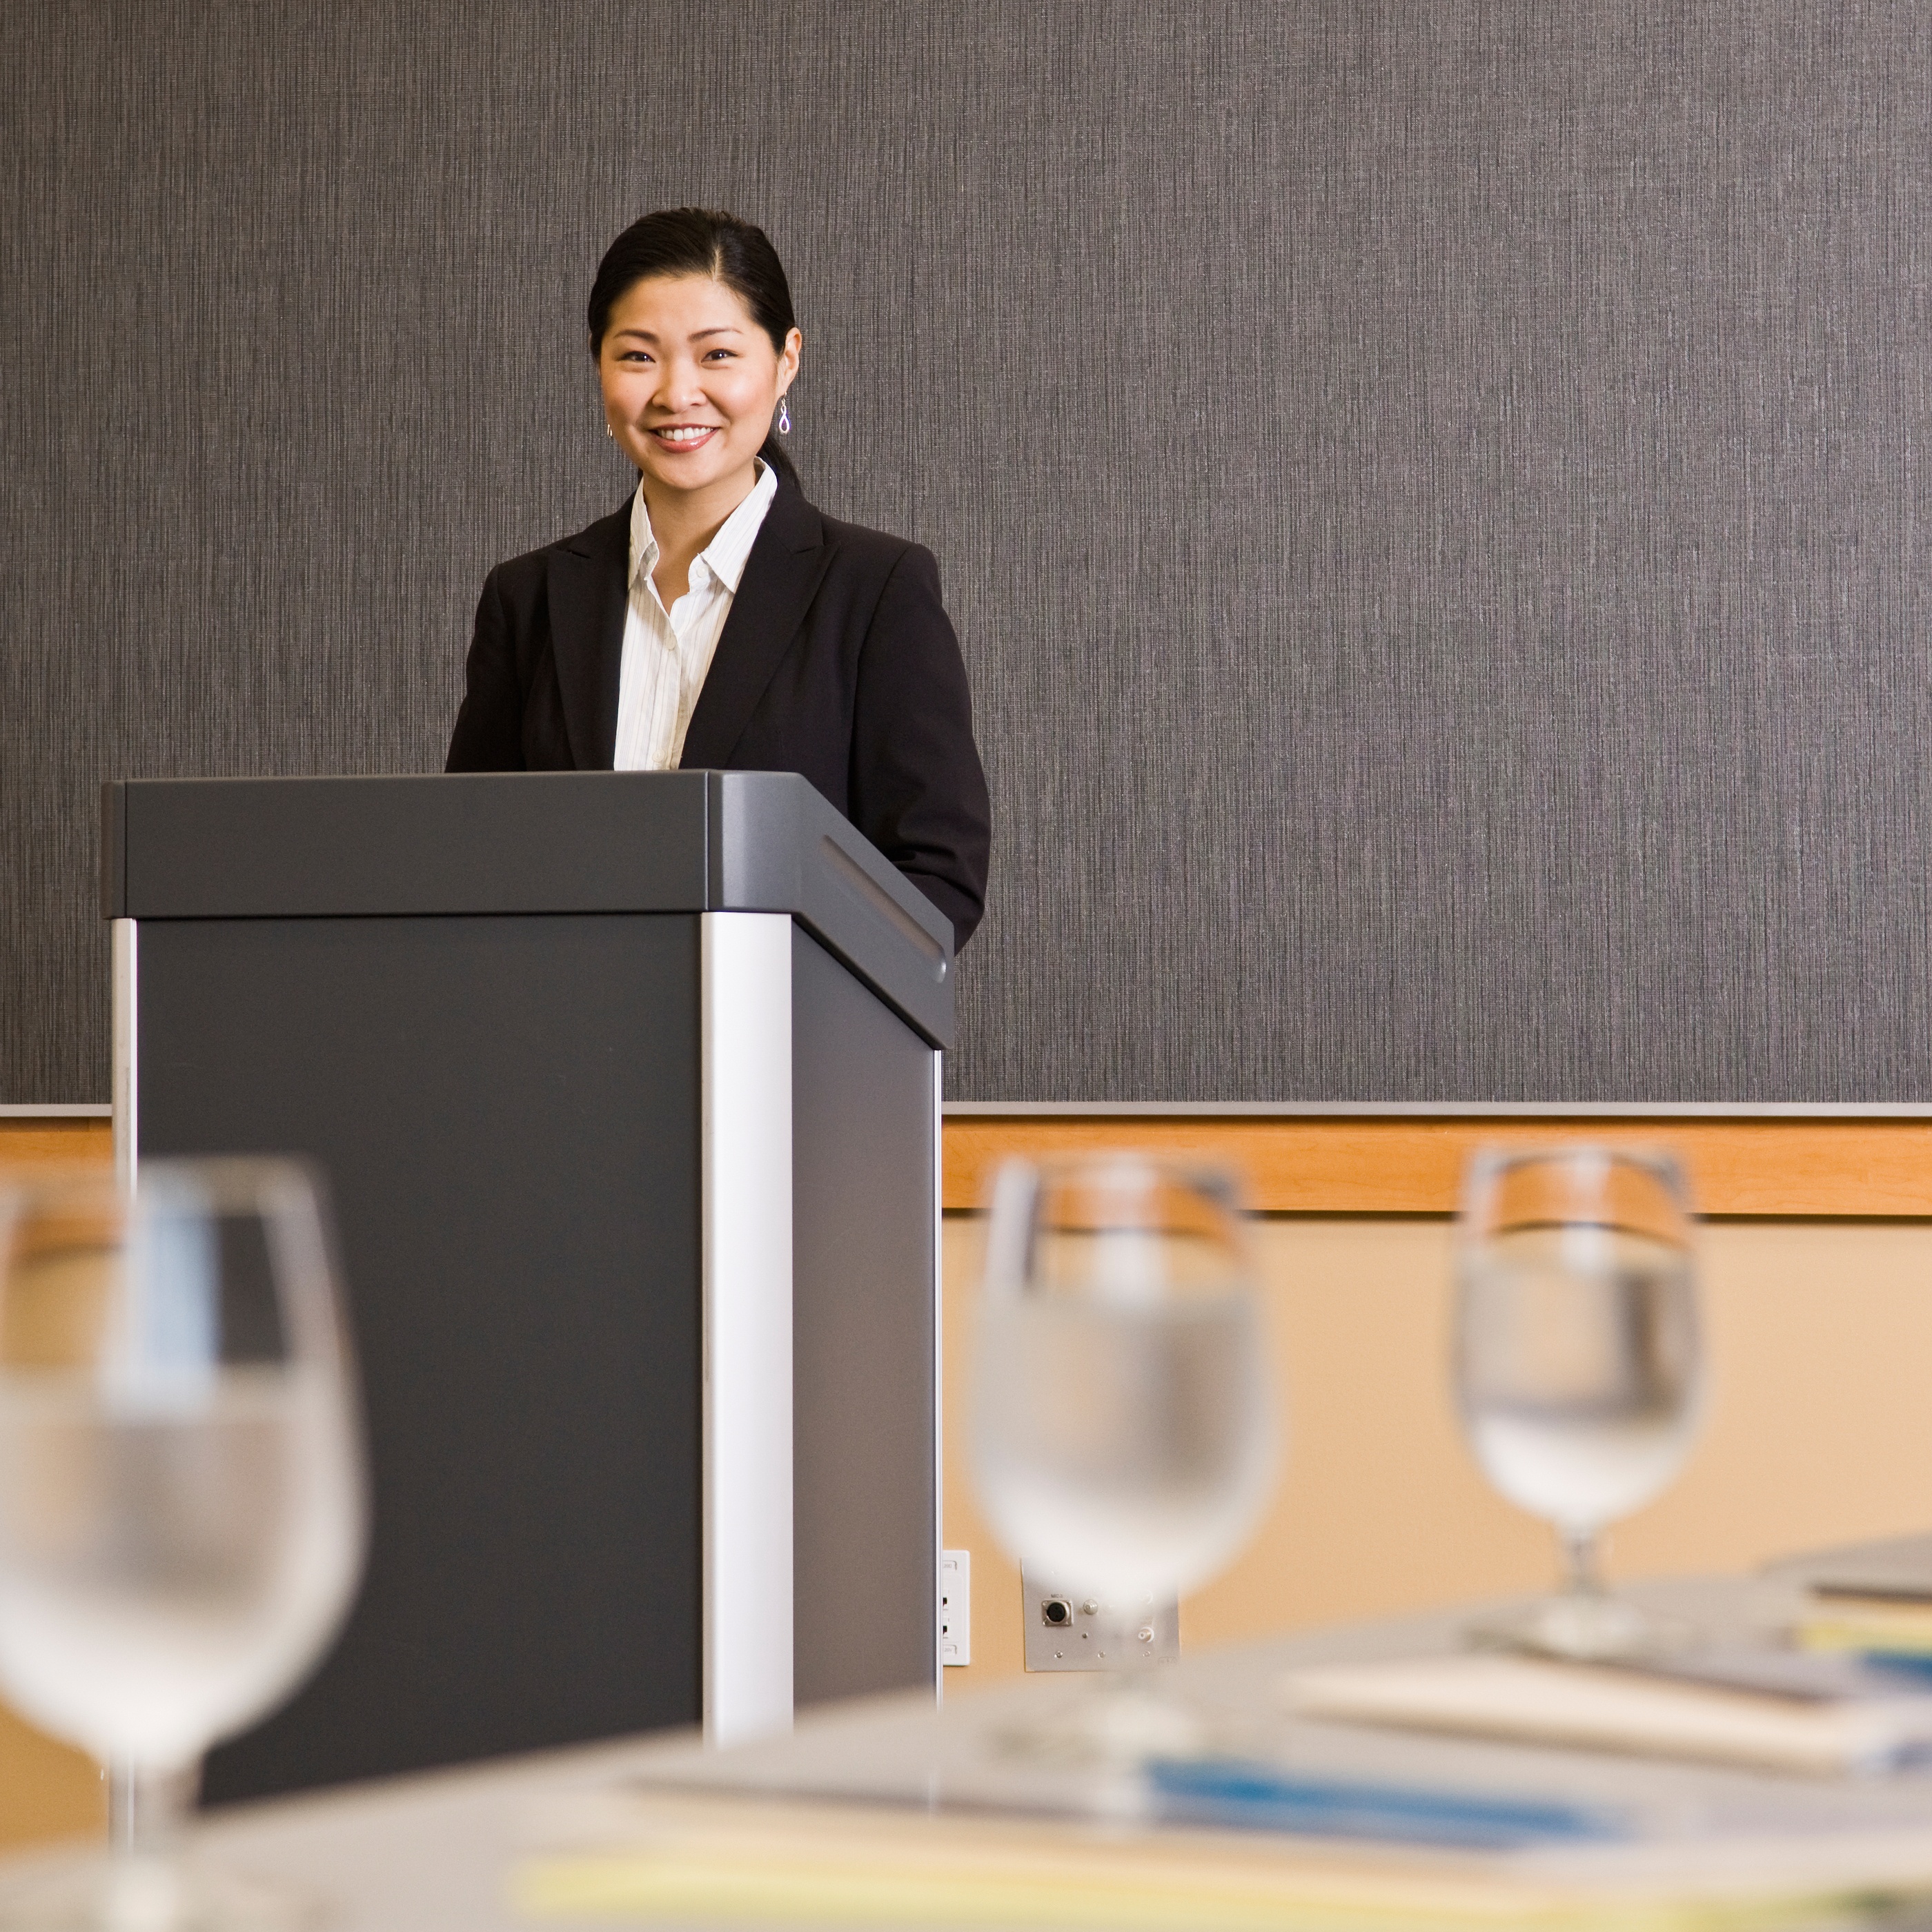 4 Tips for a Successful Presentation